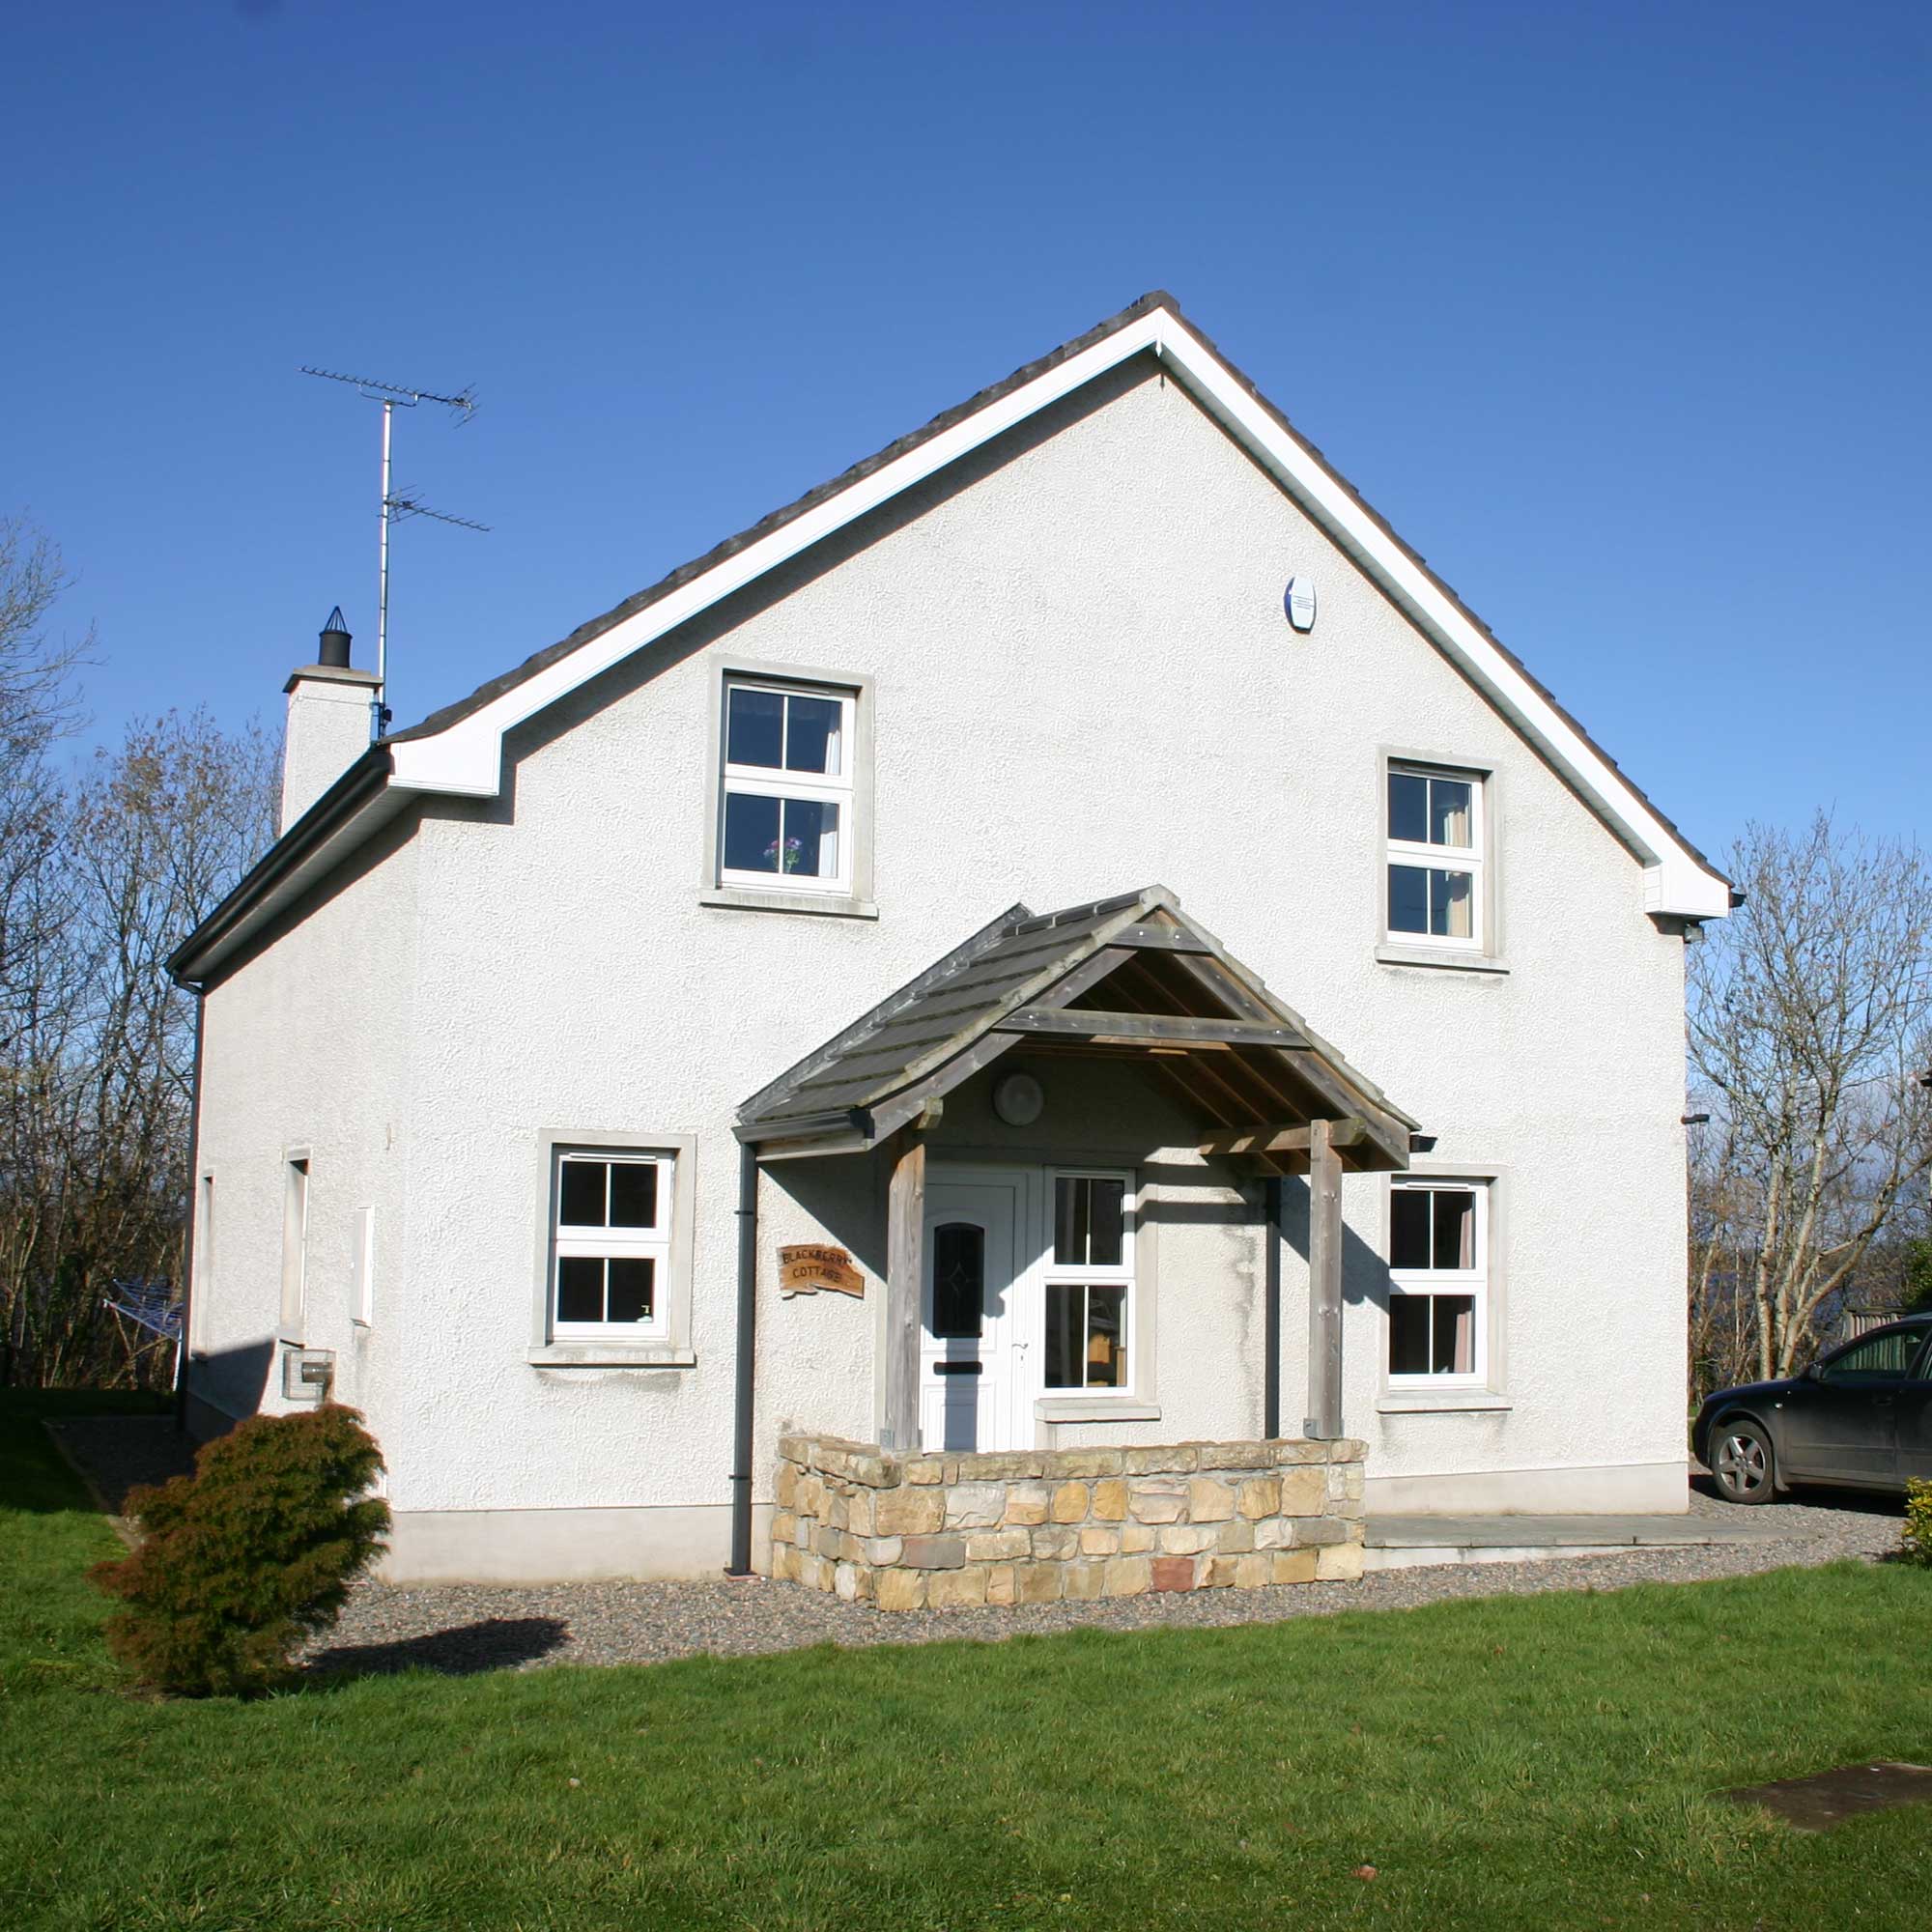 Bluebell & Blackberry Self Catering Cottages close to Lough Erne in Co Fermanagh, Northern Ireland